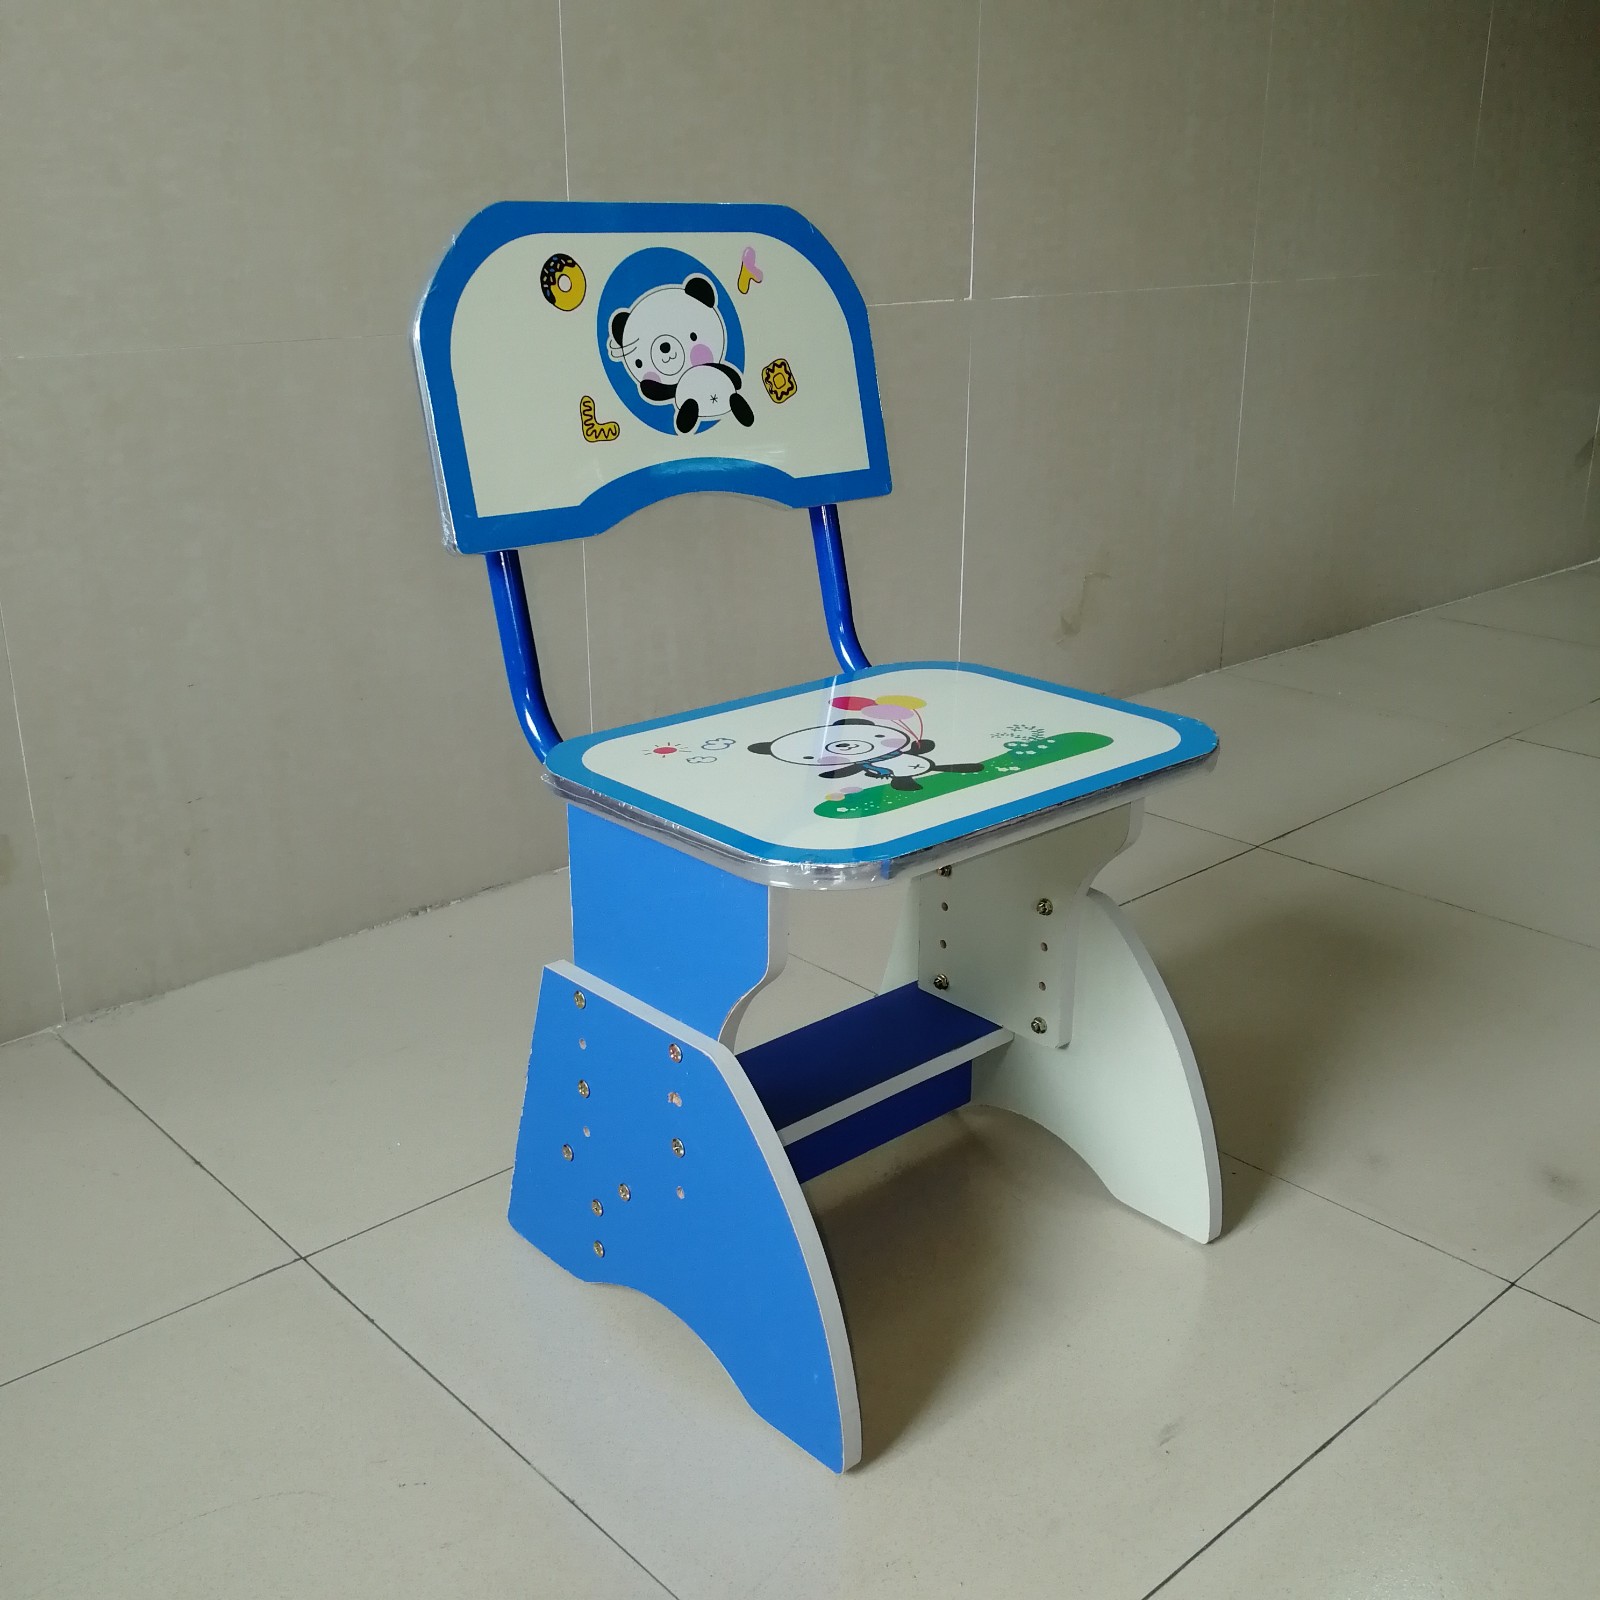 Aoqi study desk and chair set inquire now for household